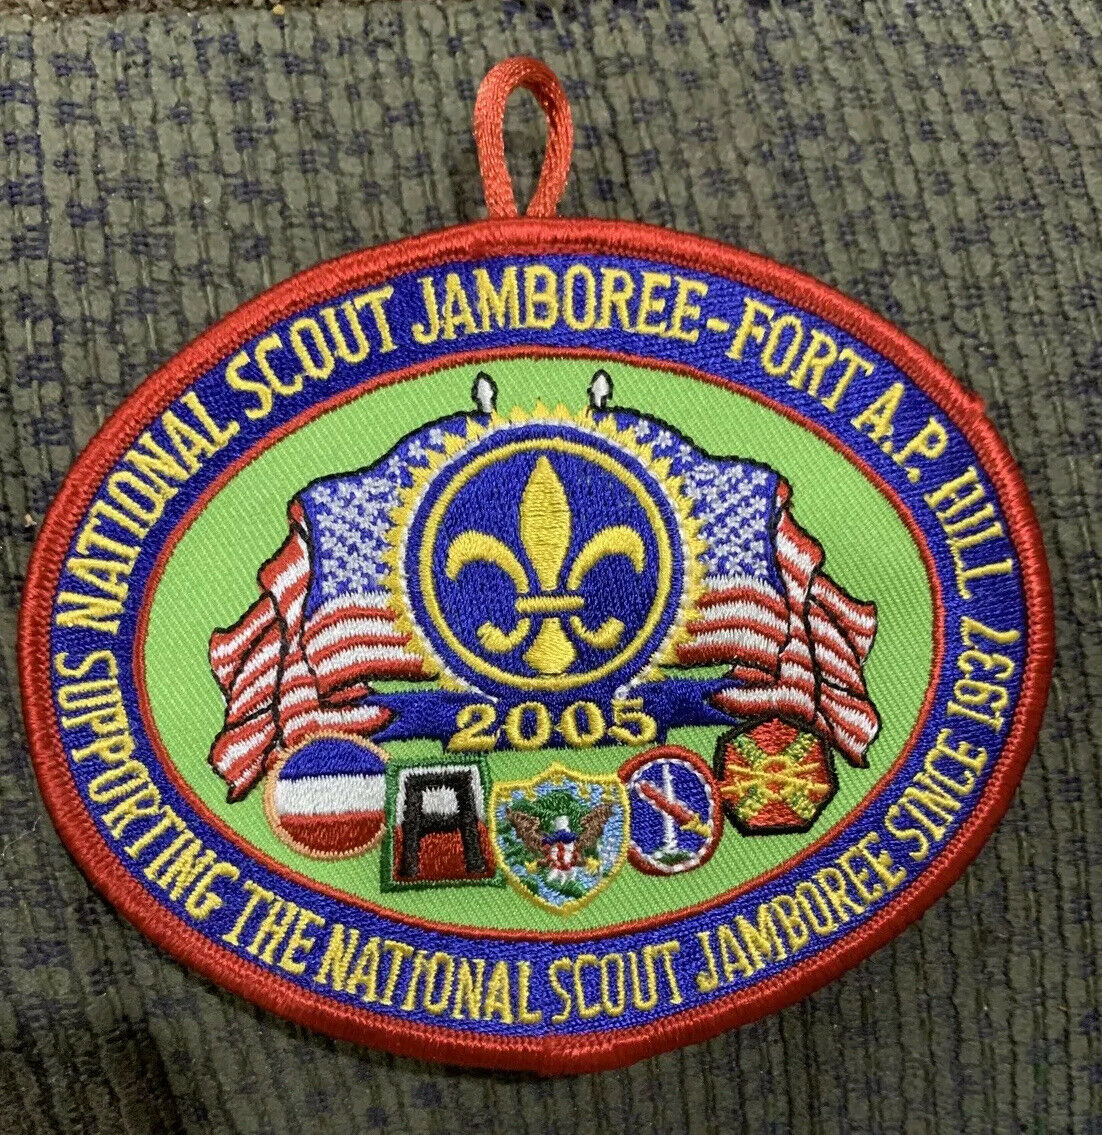 Mint 2005 Boy Scout National Jamboree Patch Supporting The National Scout Jambo